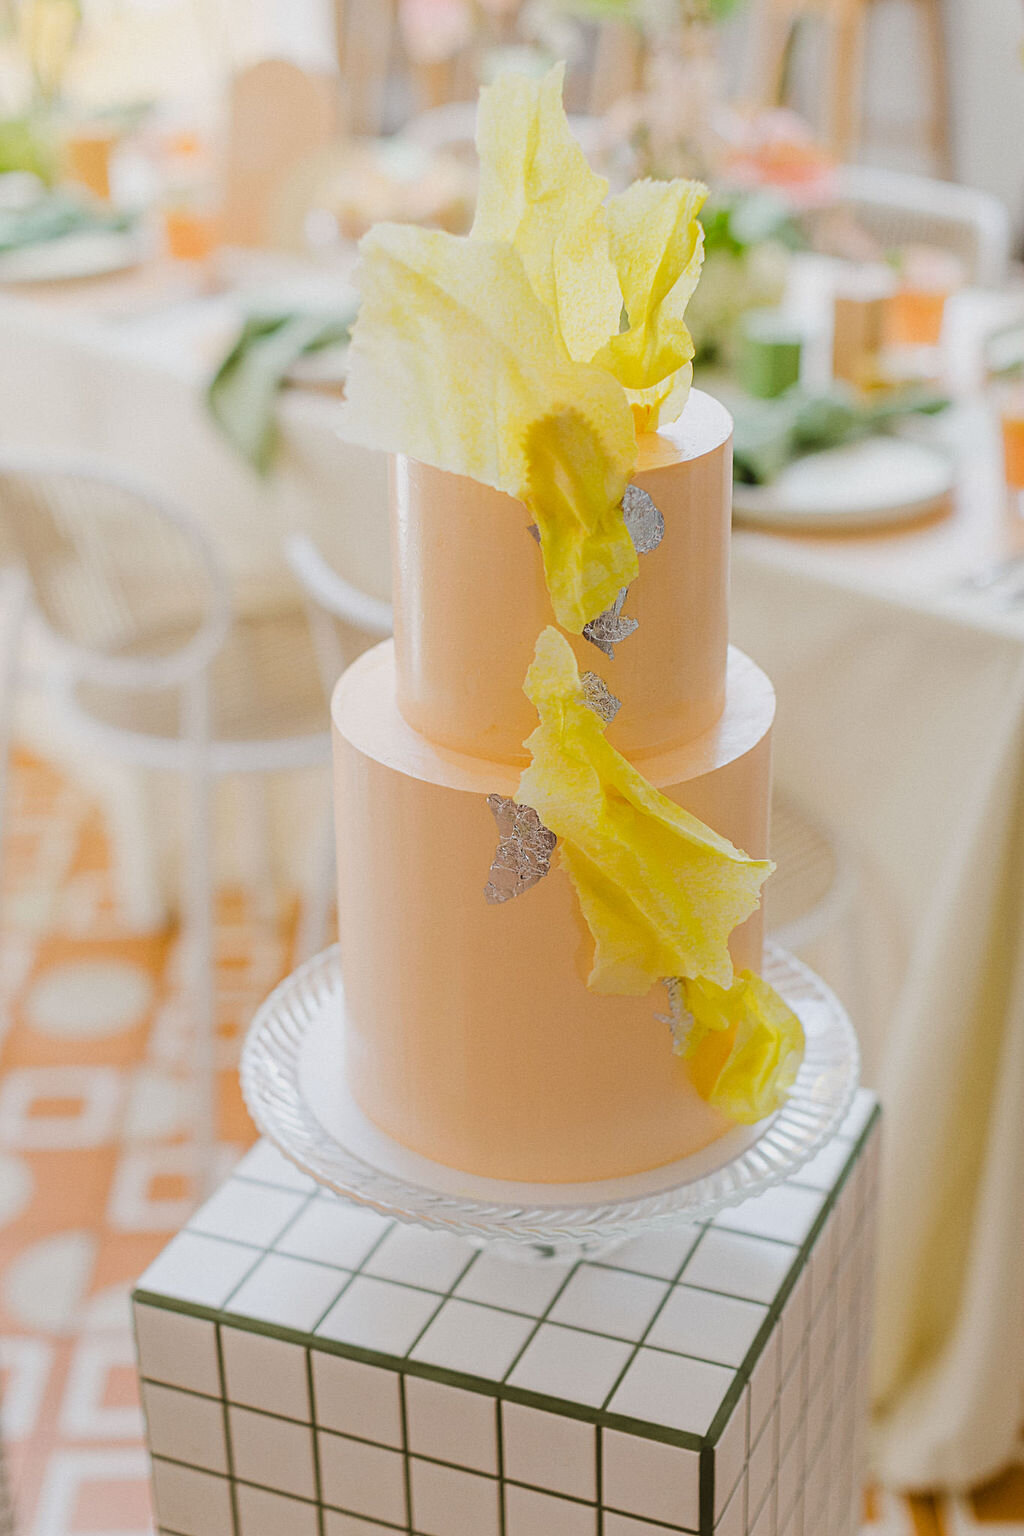 The cake brief was fun, dramatic, bold, yet elegant and oh boy did Violet & Salt deliver!  Peach buttercream, lemon textural edible paper and silver adorned accents, what’s not to love about this dreamy summer cake?!